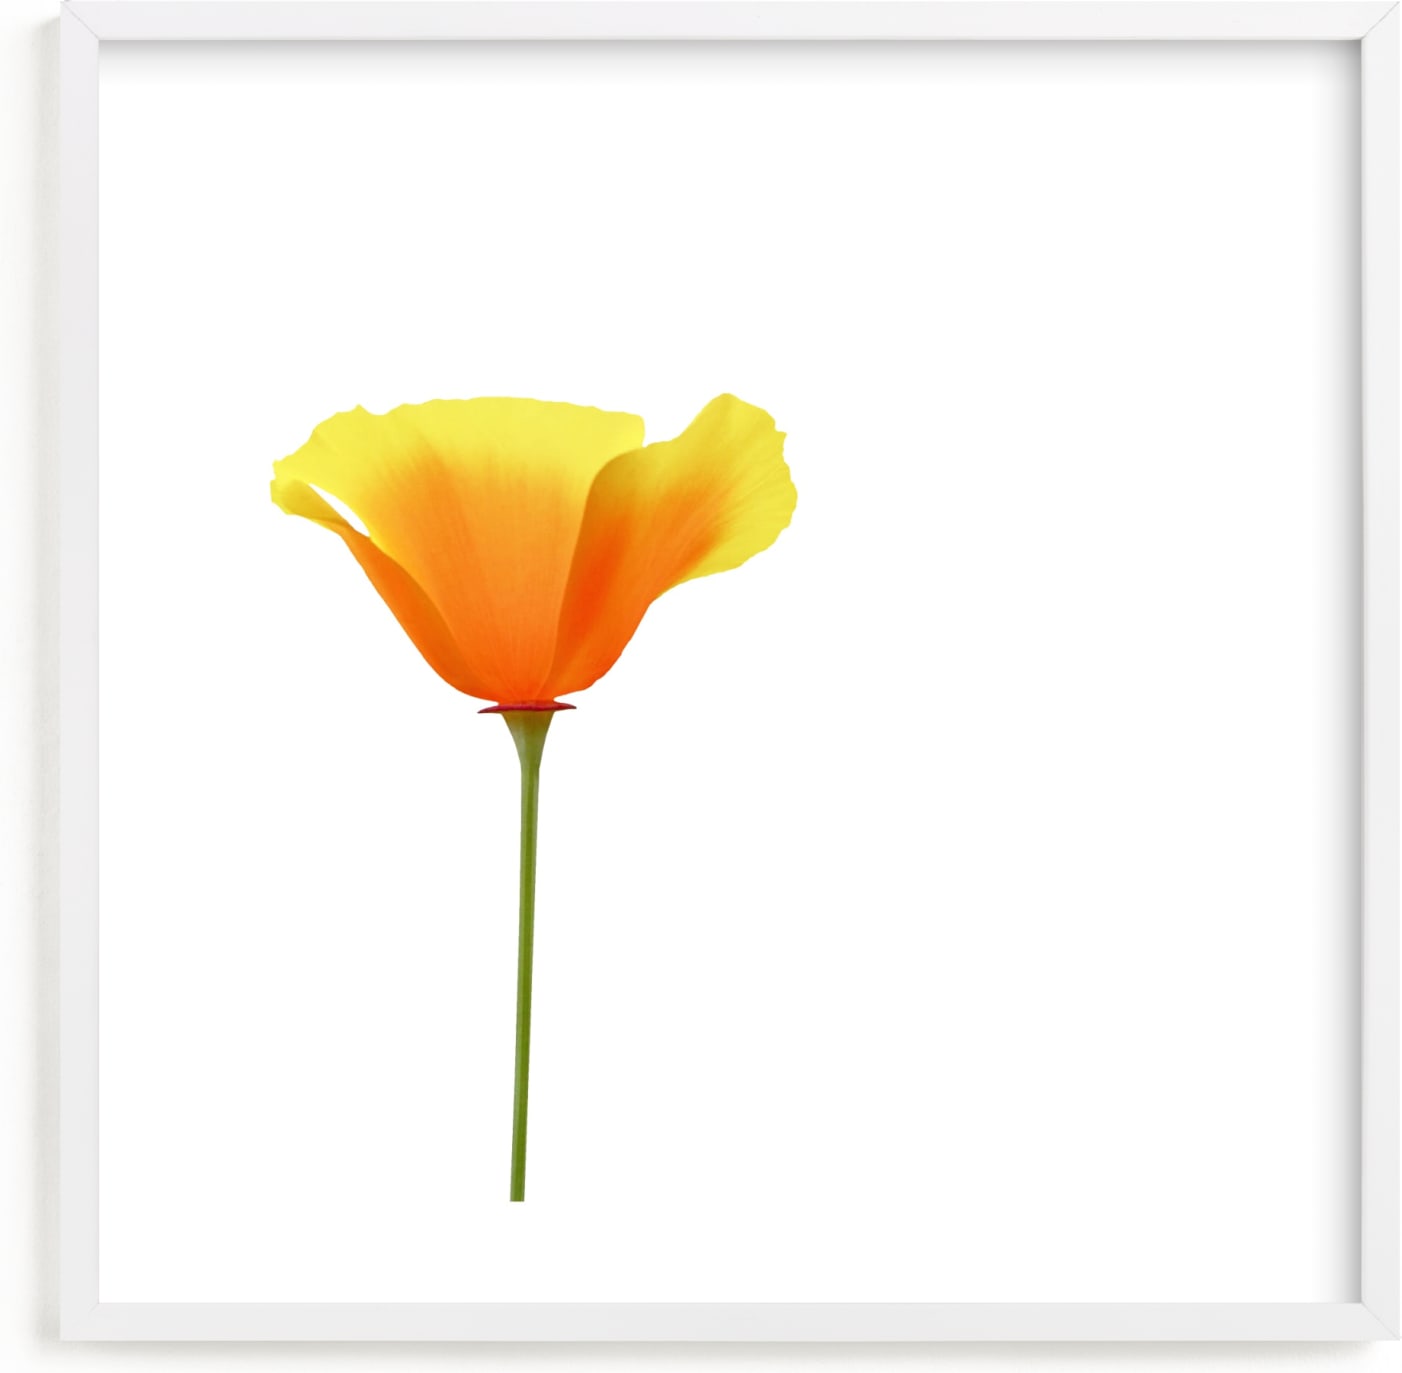 This is a white nursery wall art by Corinne Aelbers called California Poppy.